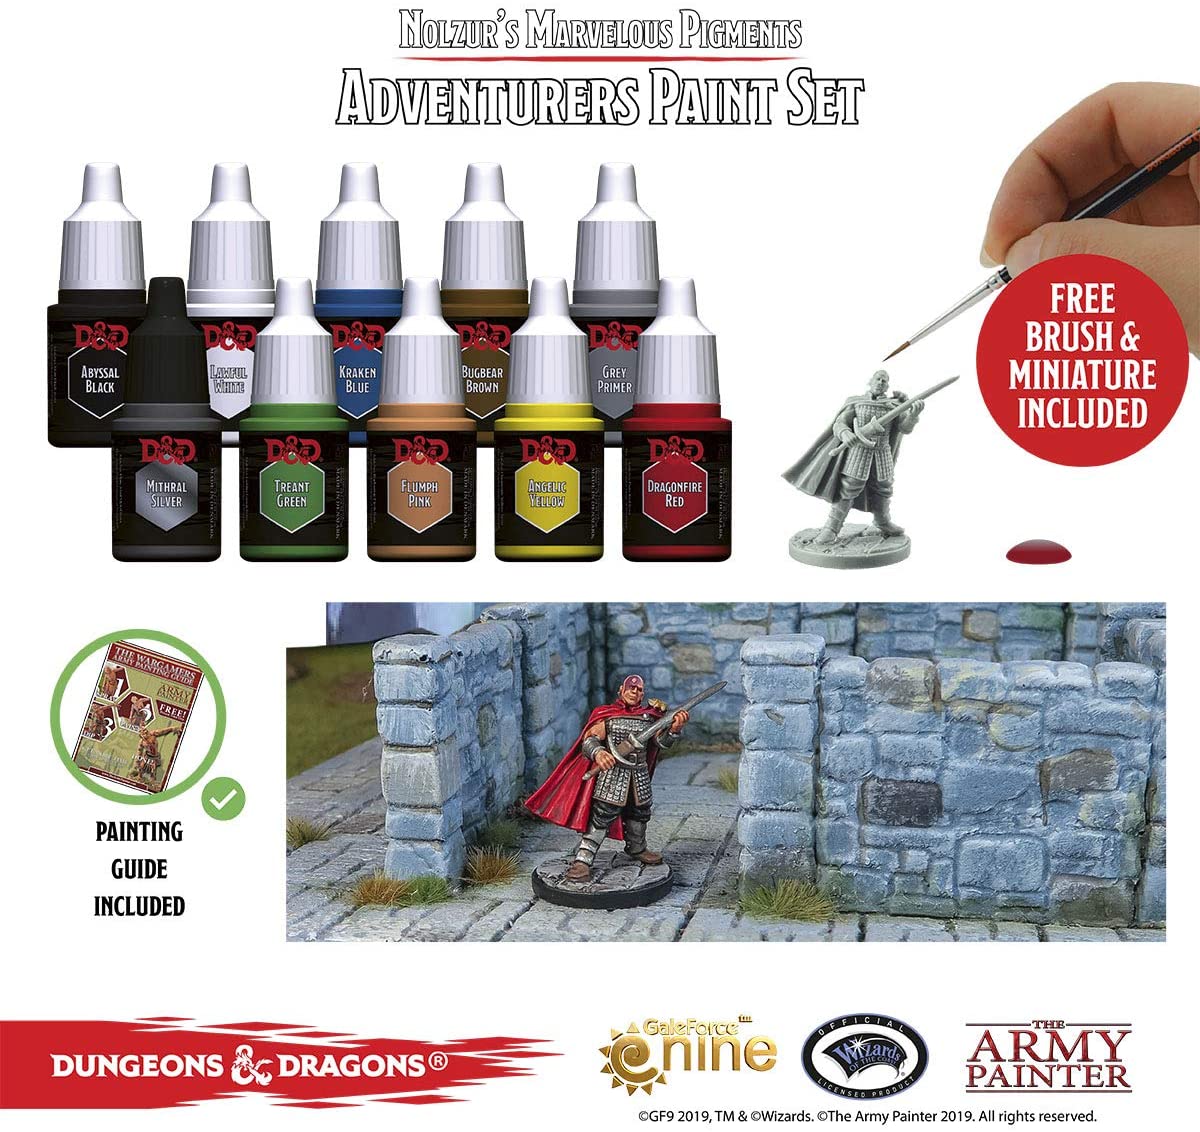 The Army Painter Dungeons and Dragons Official Paint Line Adventurer's Paint Set info